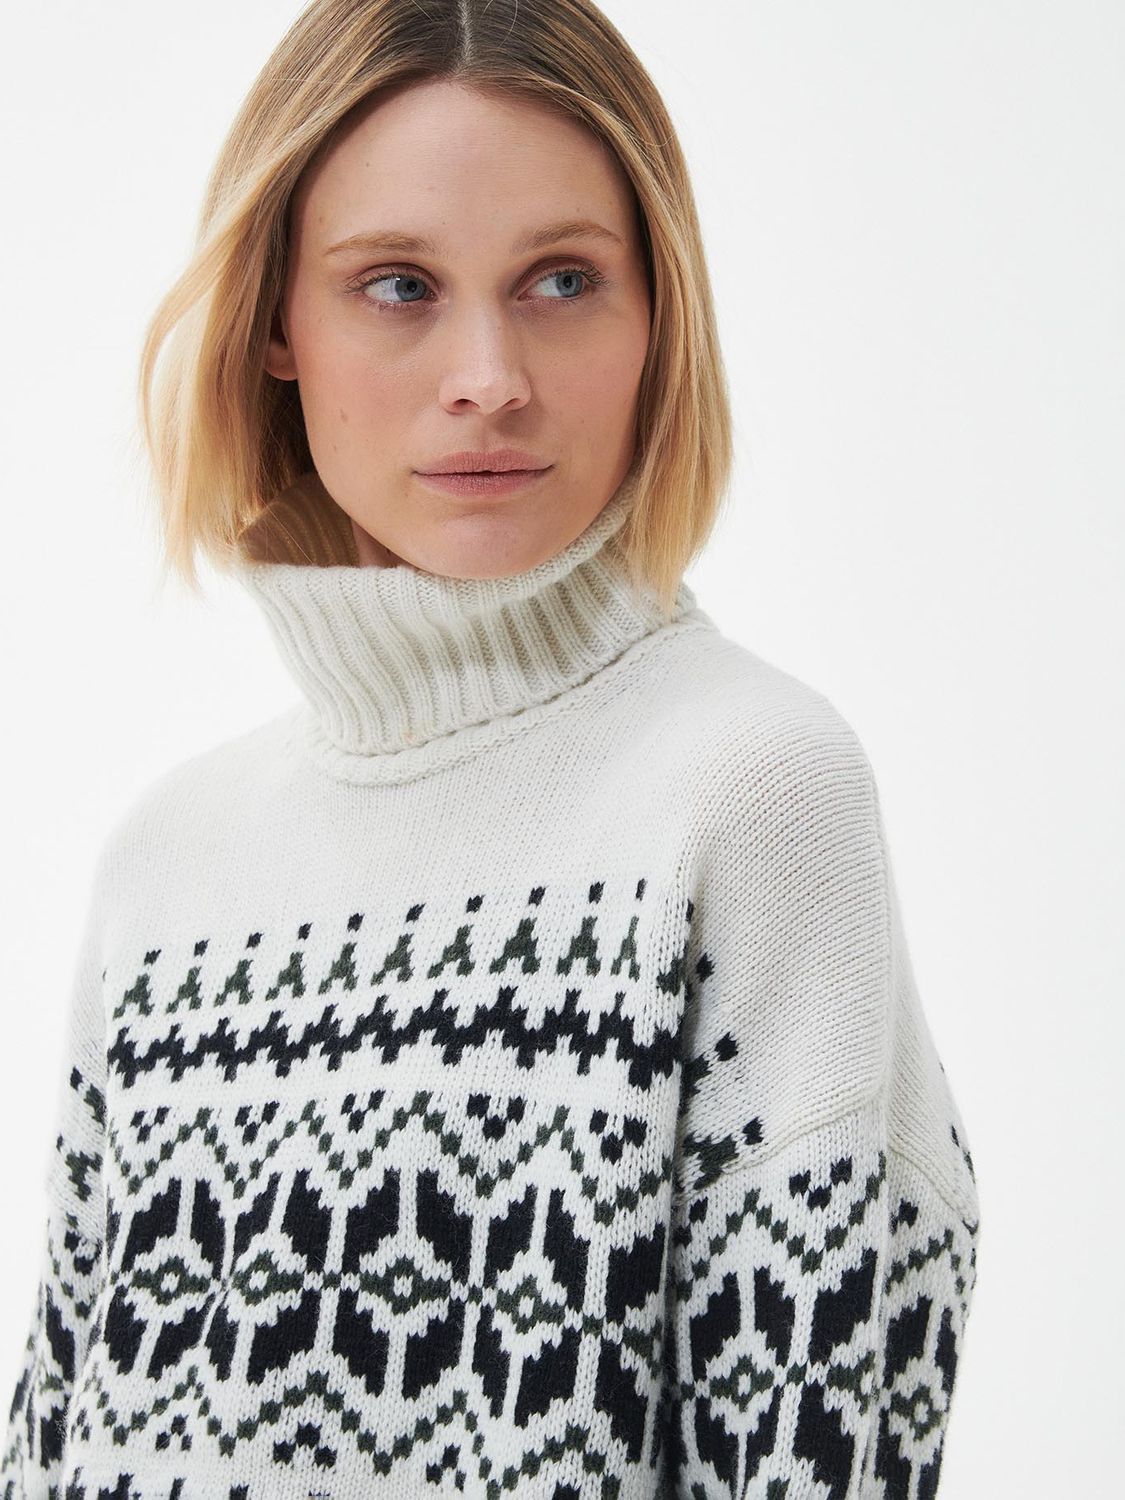 Barbour Patrisse Fair Isle Knitted Jumper, Antique White